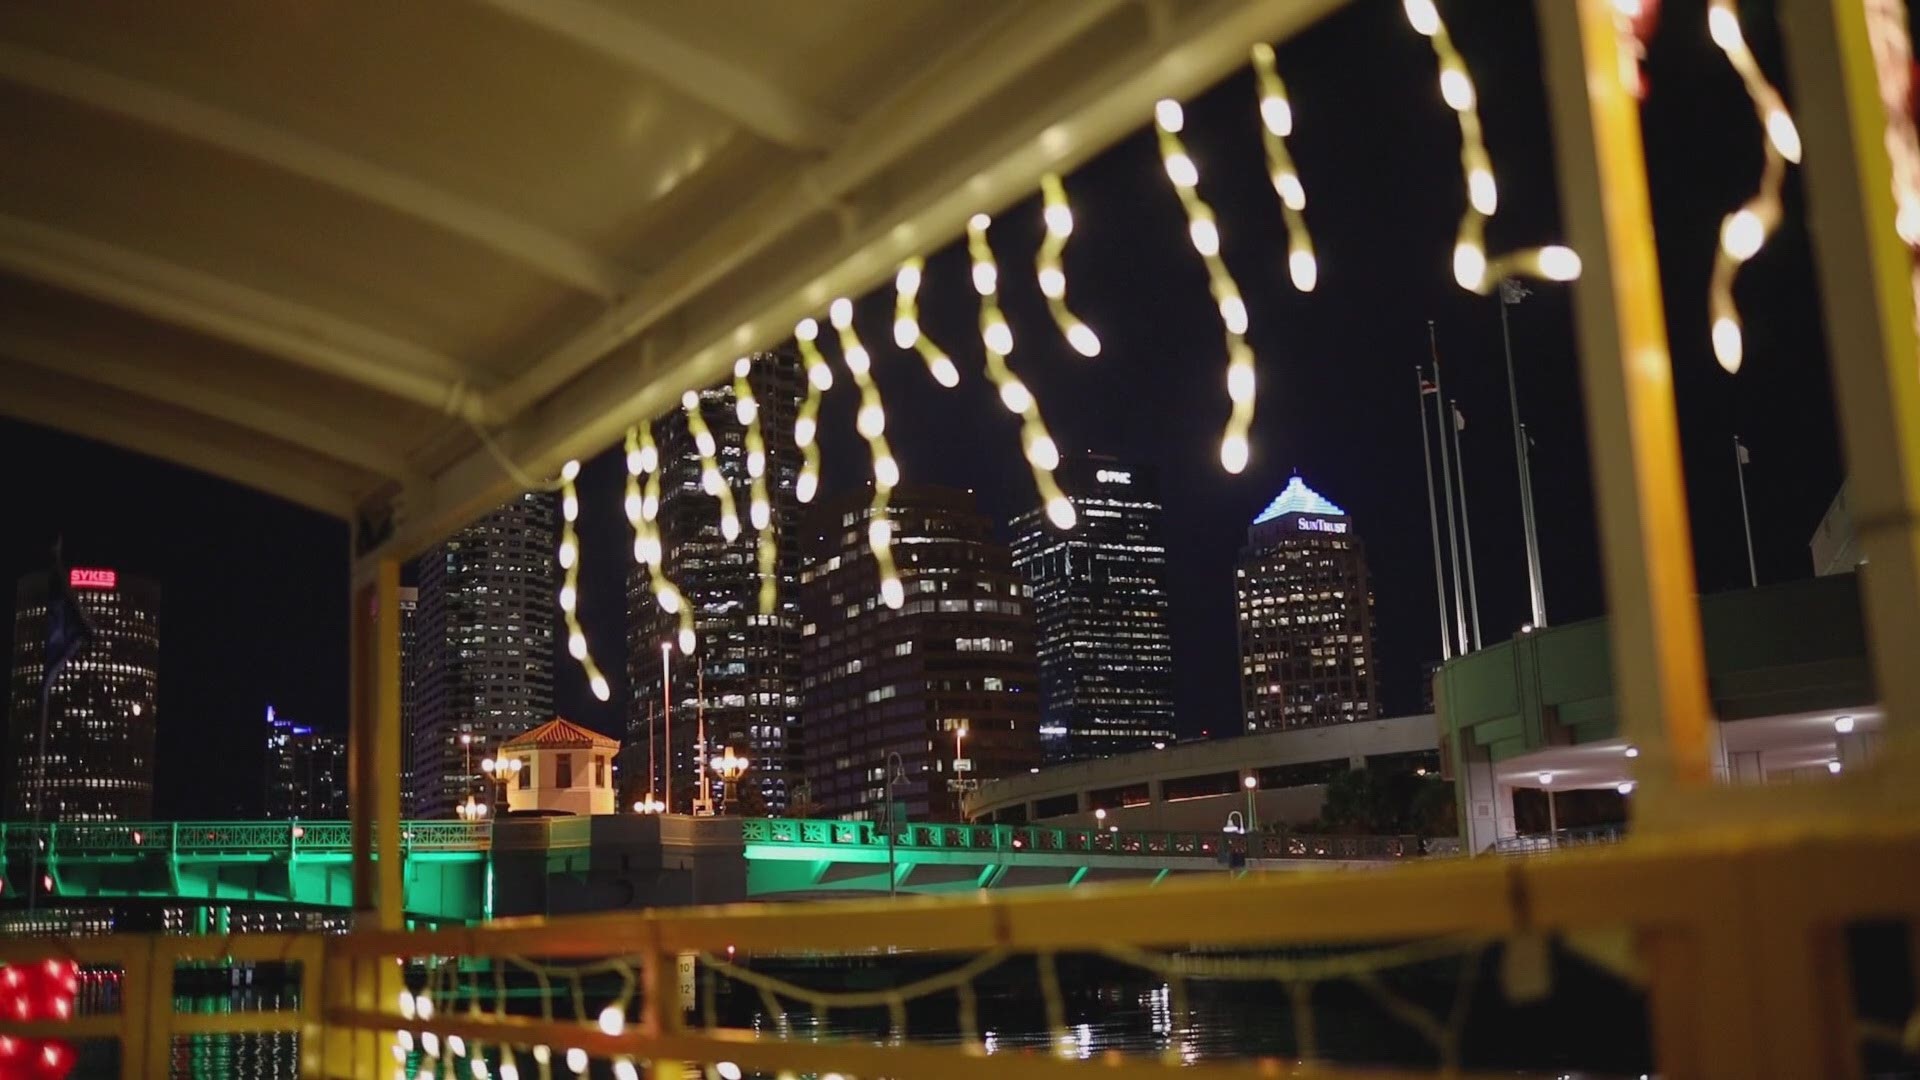 Tampa’s Pirate Water Taxi is the perfect ride for an evening stroll on the Hillsborough River, but this time of the year, it’s turned into a holiday light show.